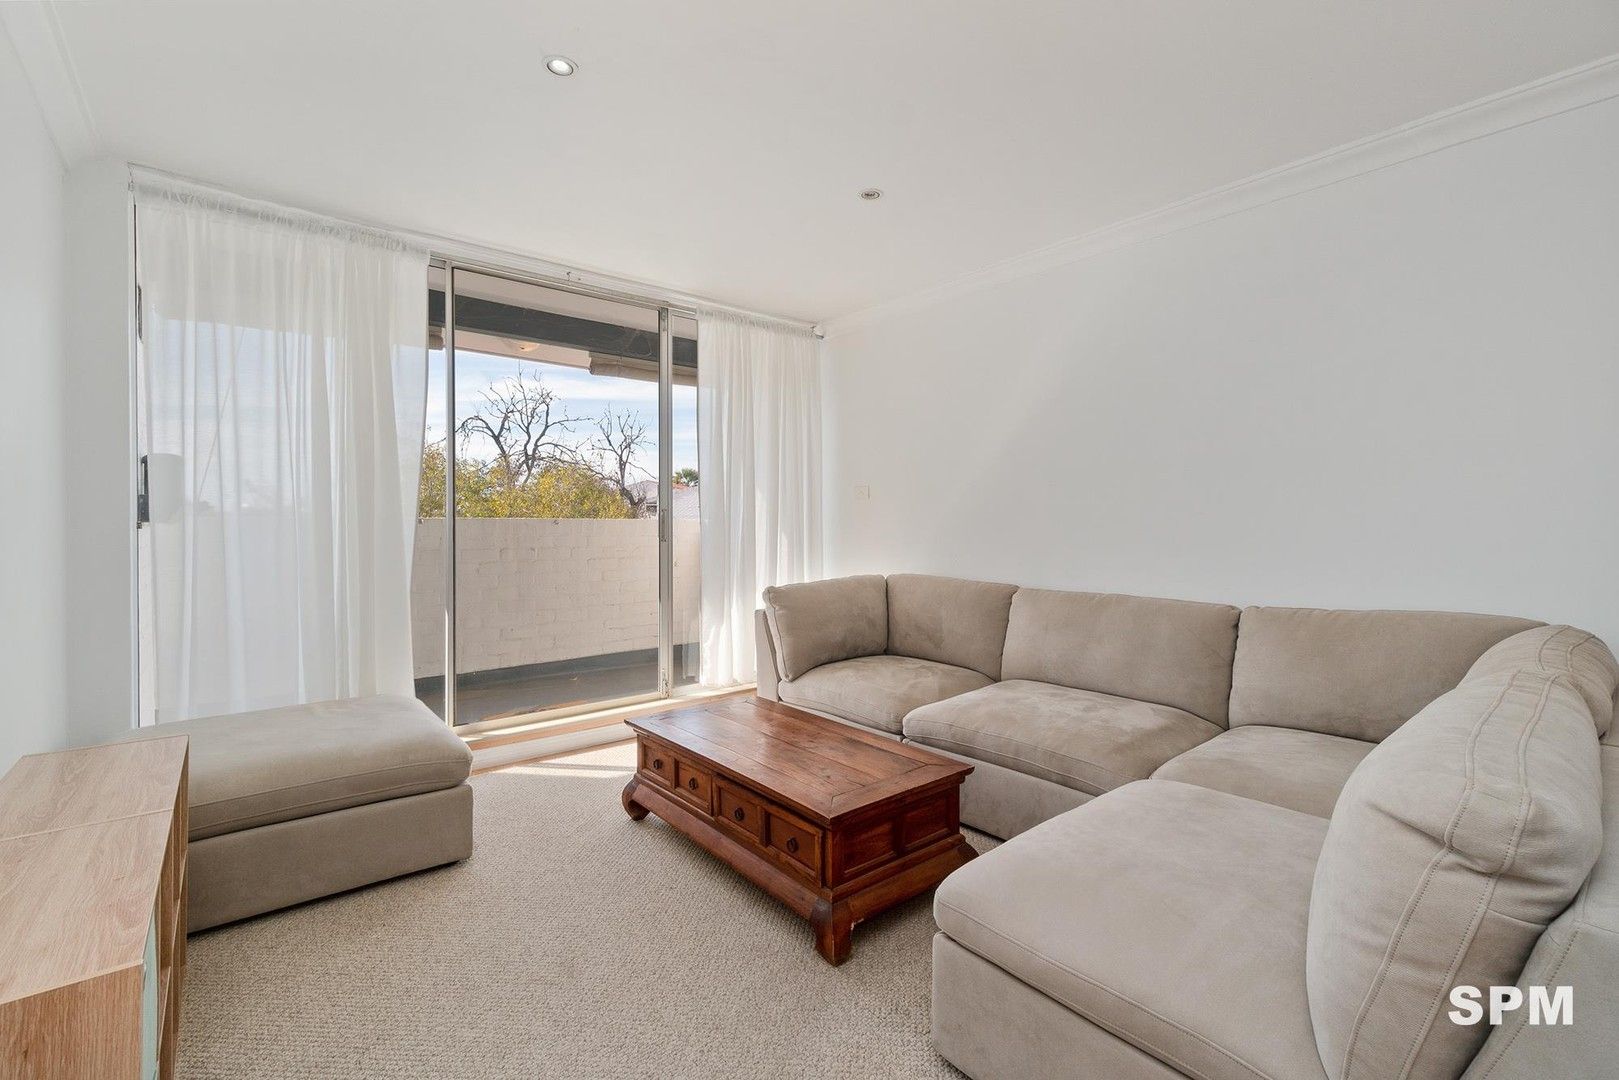 3 bedrooms Apartment / Unit / Flat in 84/12 Wall Street MAYLANDS WA, 6051